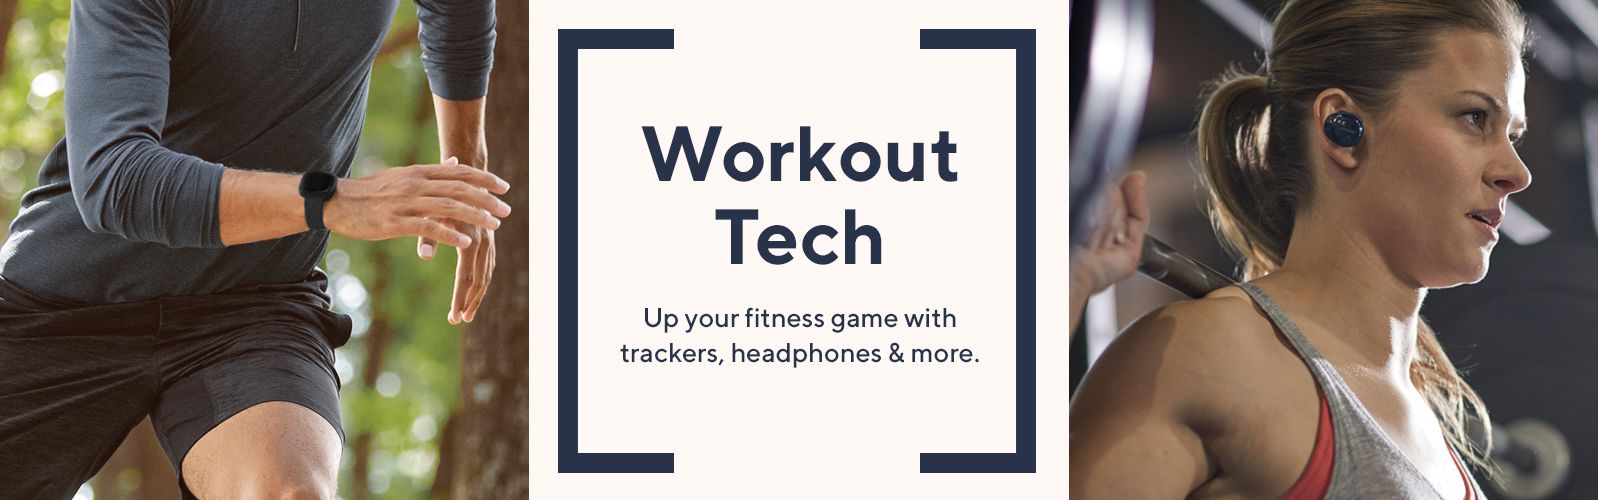 Workout Tech - Up your fitness game with trackers, headphones & more.